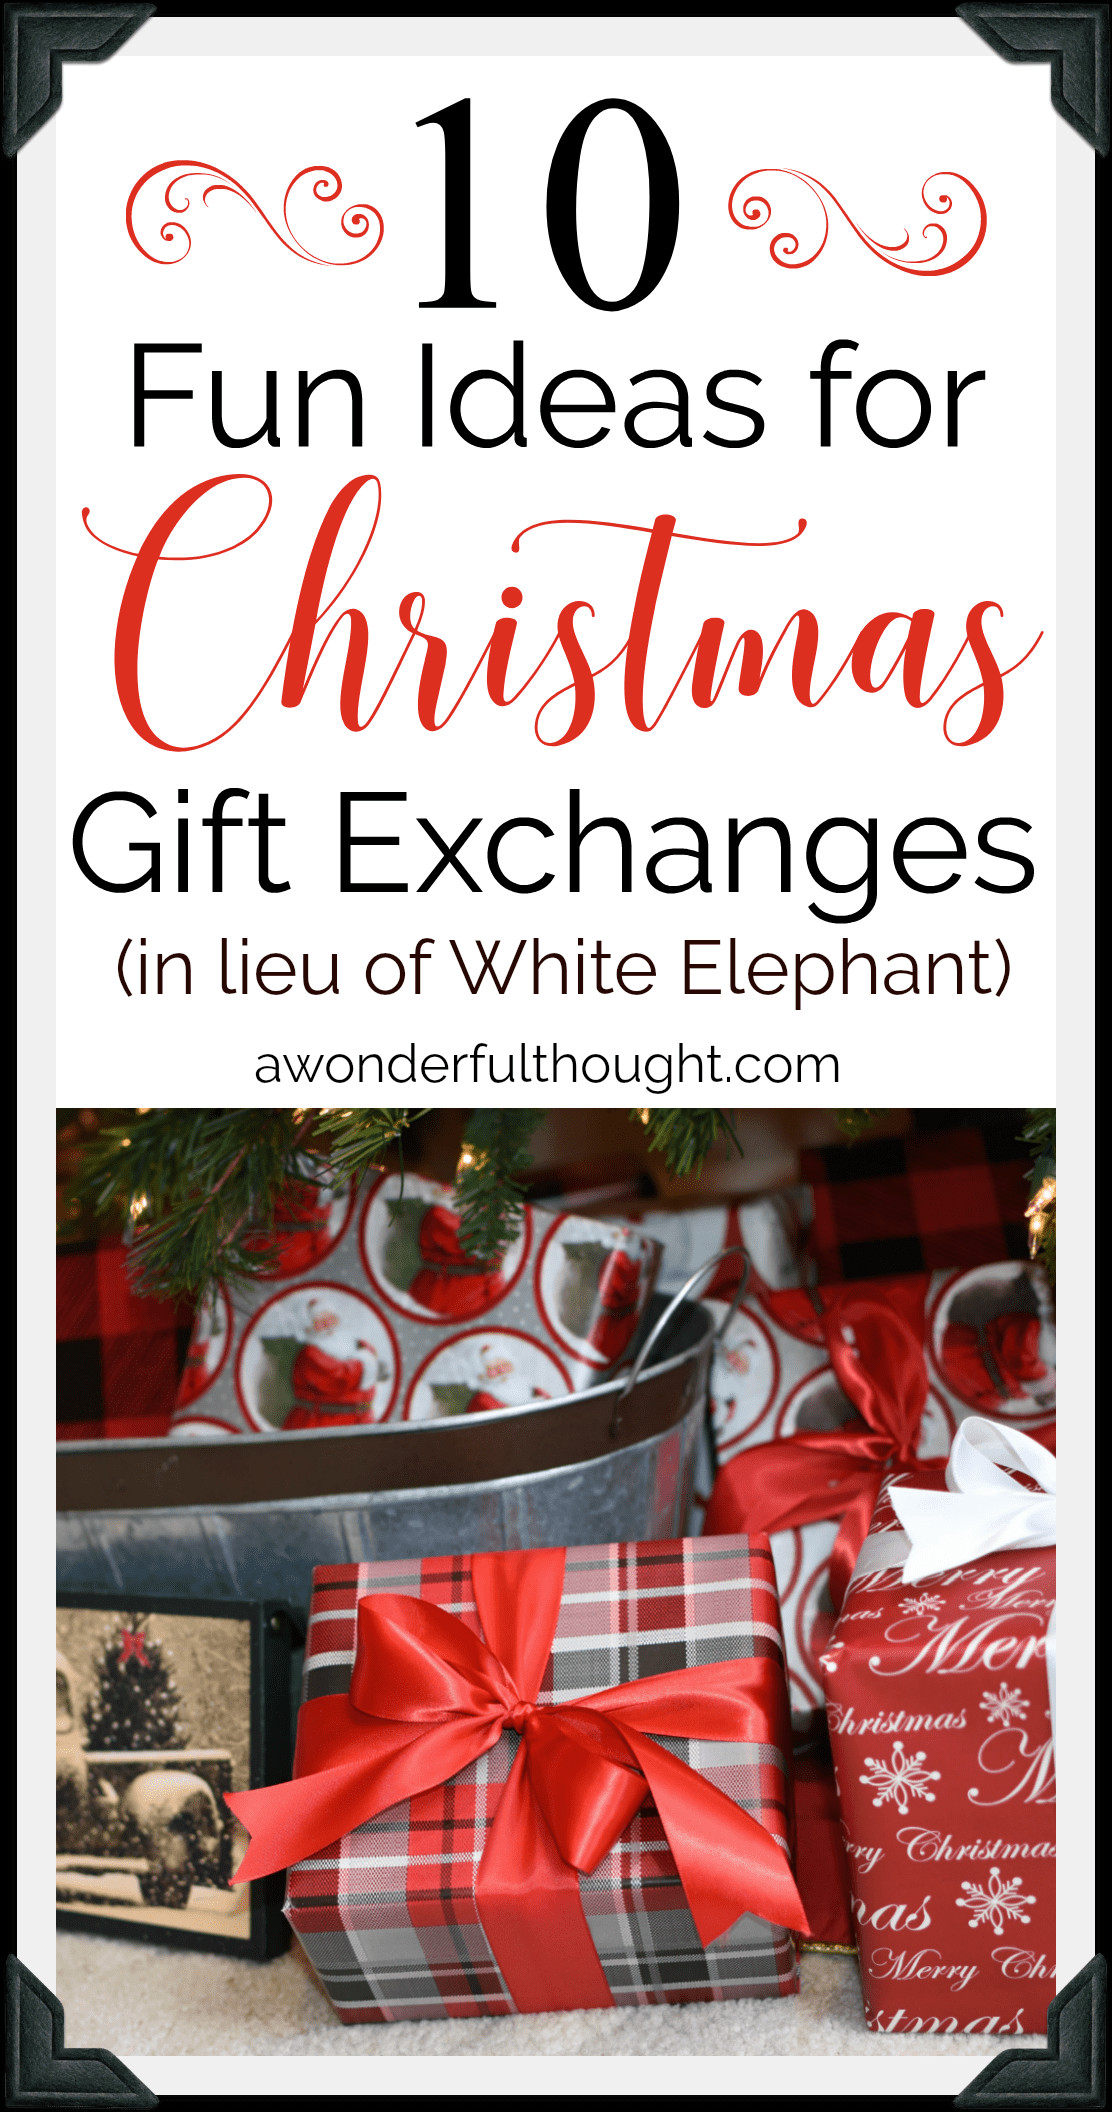 Christmas Gift Swap Ideas
 Christmas Gift Exchange Ideas A Wonderful Thought